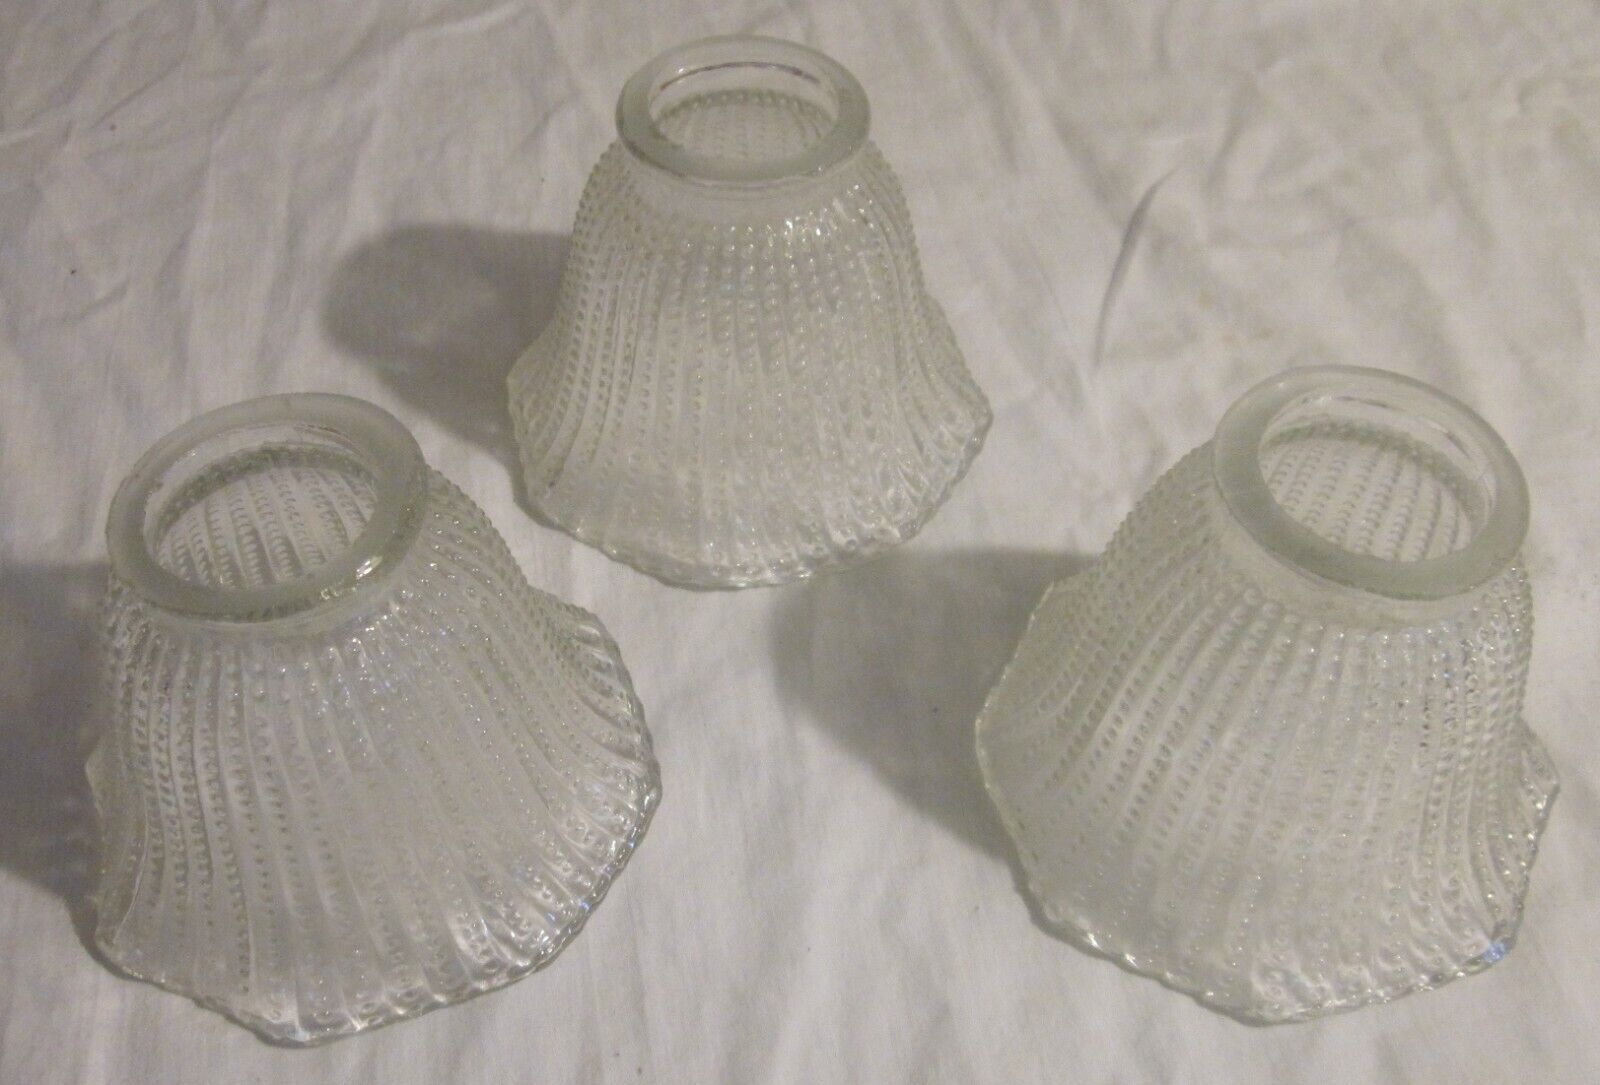 Three Matching CLEAR GLASS LIGHT SHADES -- Vertical Ribbed Pattern with Pearls